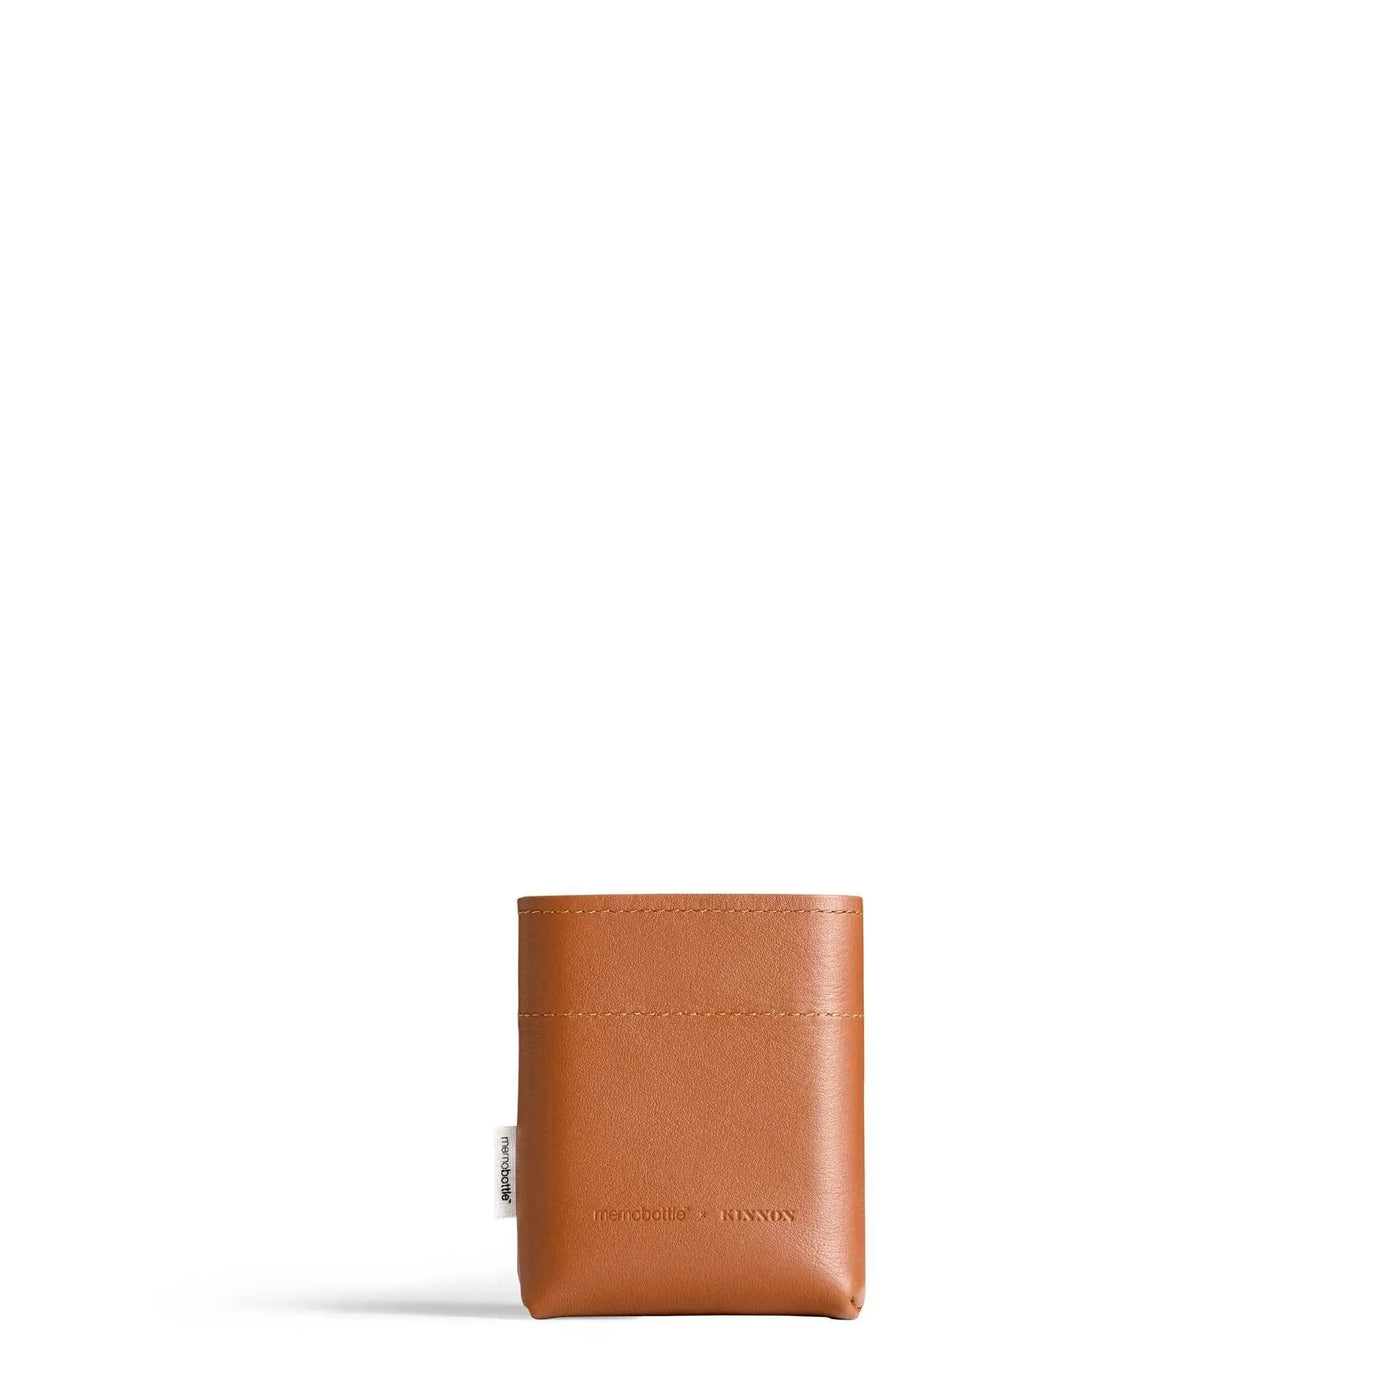 A7 Memobottle Leather Sleeve